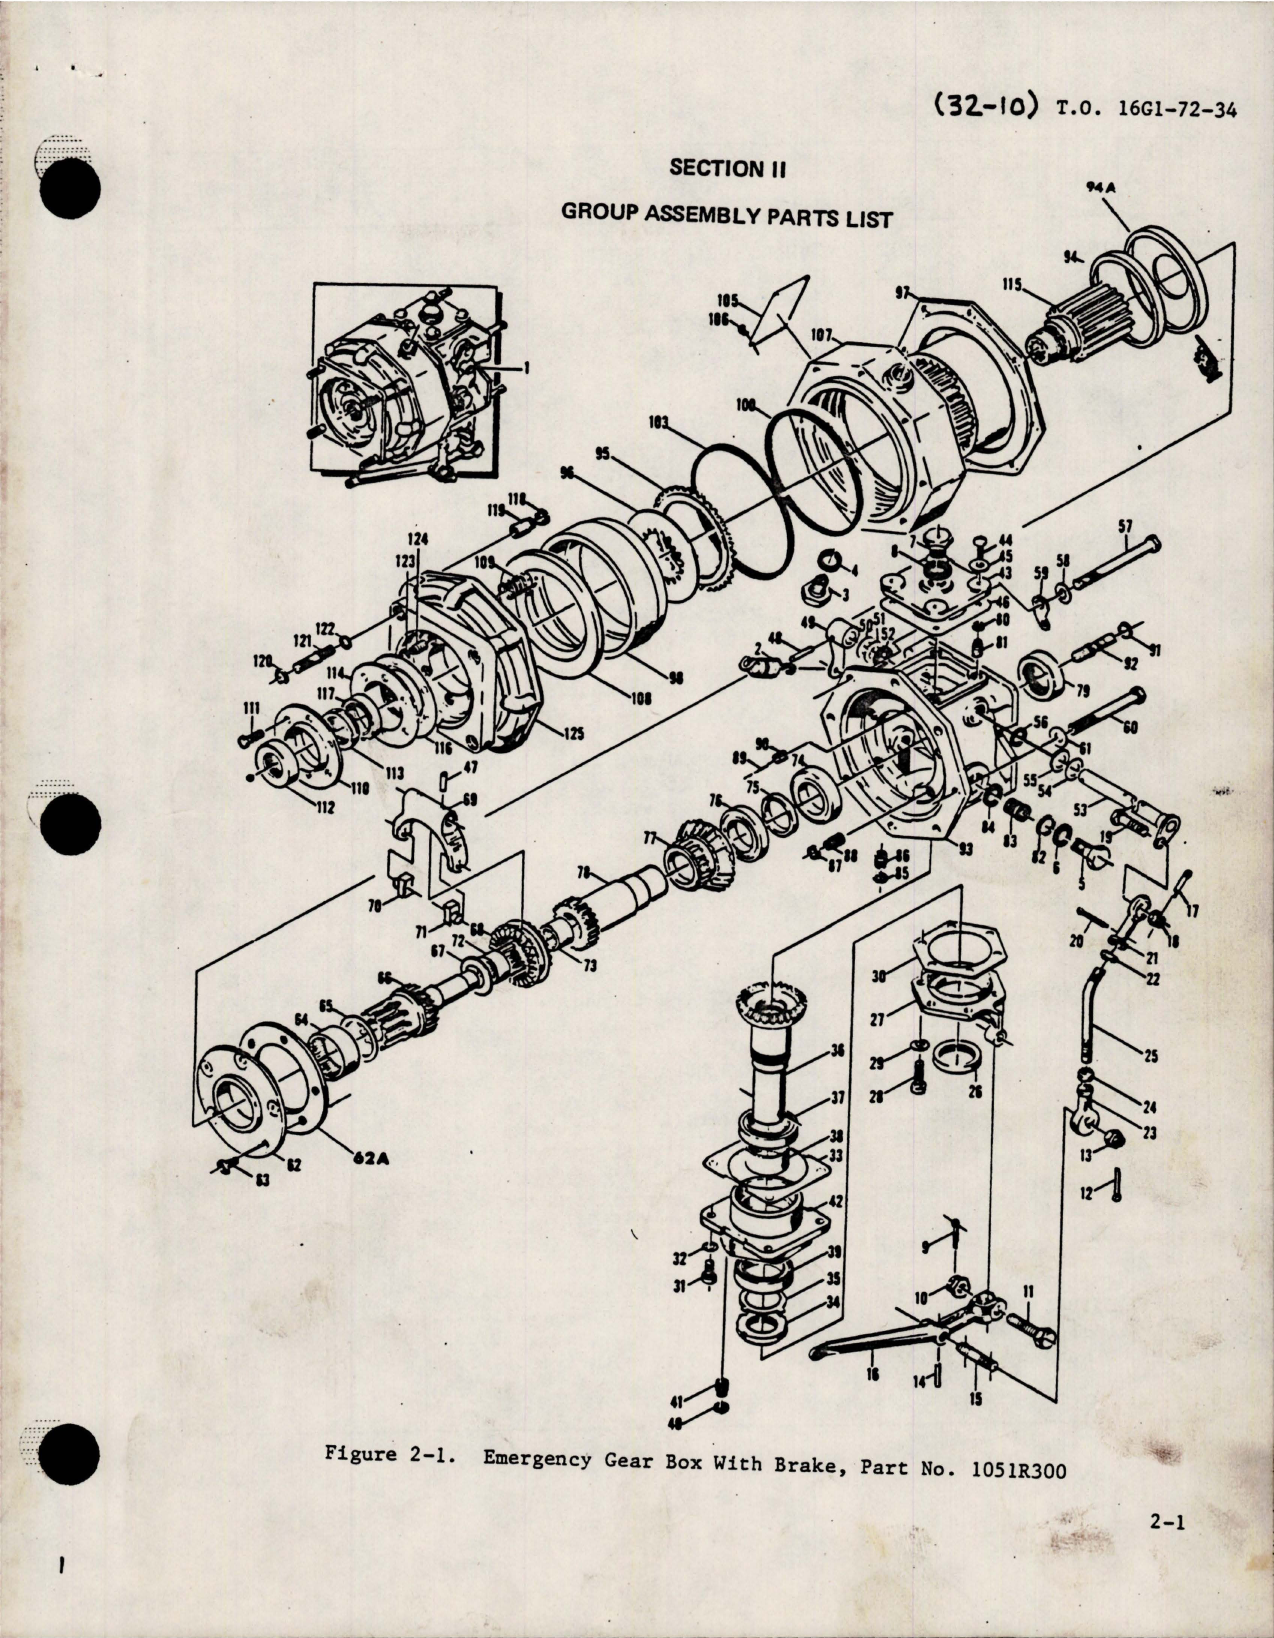 Sample page 7 from AirCorps Library document: Illustrated Parts Breakdown for Emergency Gear Box with Brake - Parts 1051R228, 1051R268, 1051R274 and 1051R300